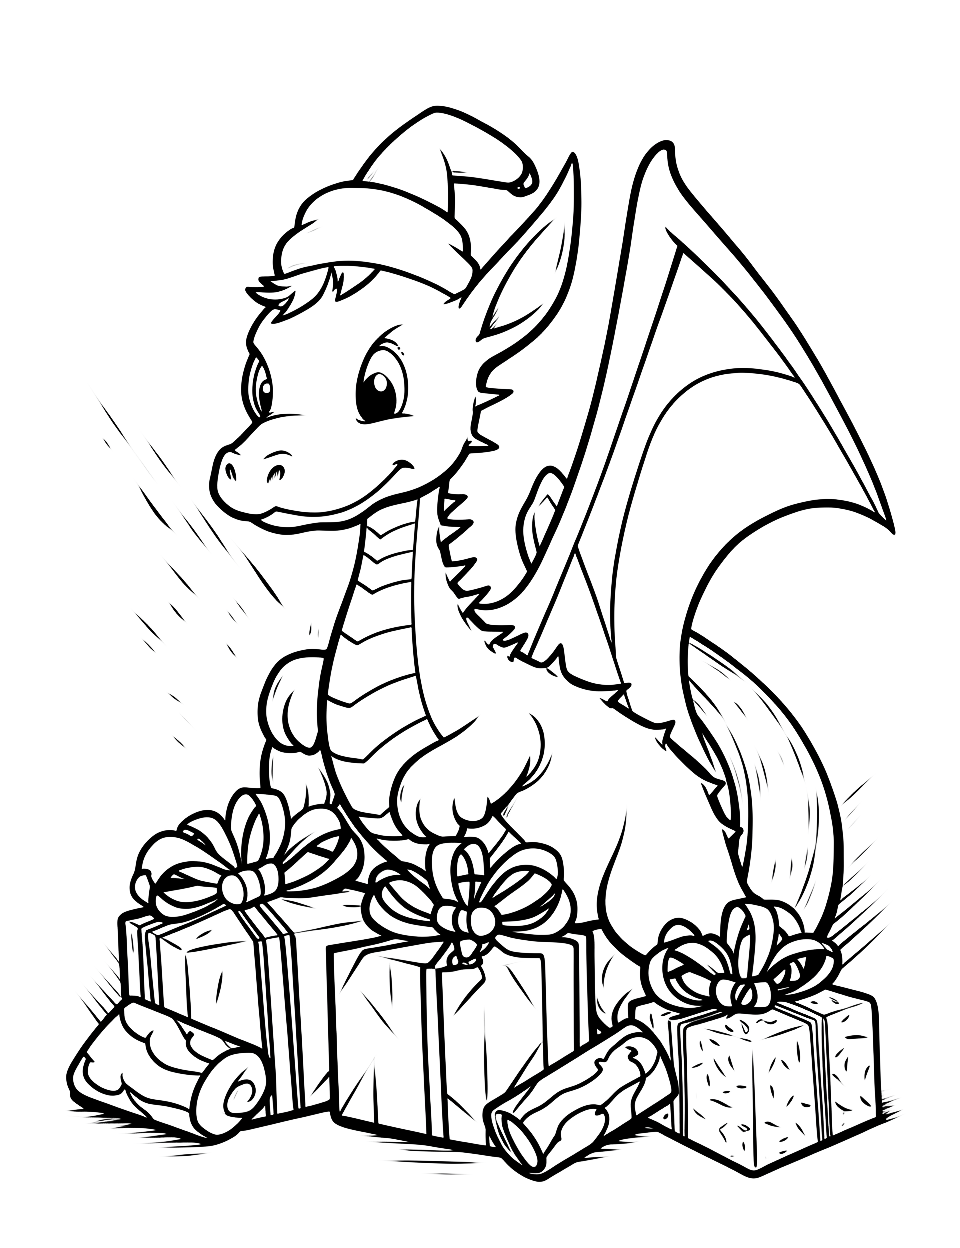 Free christmas coloring pages for kids printables dragon coloring page christmas coloring pages printable christmas coloring pages